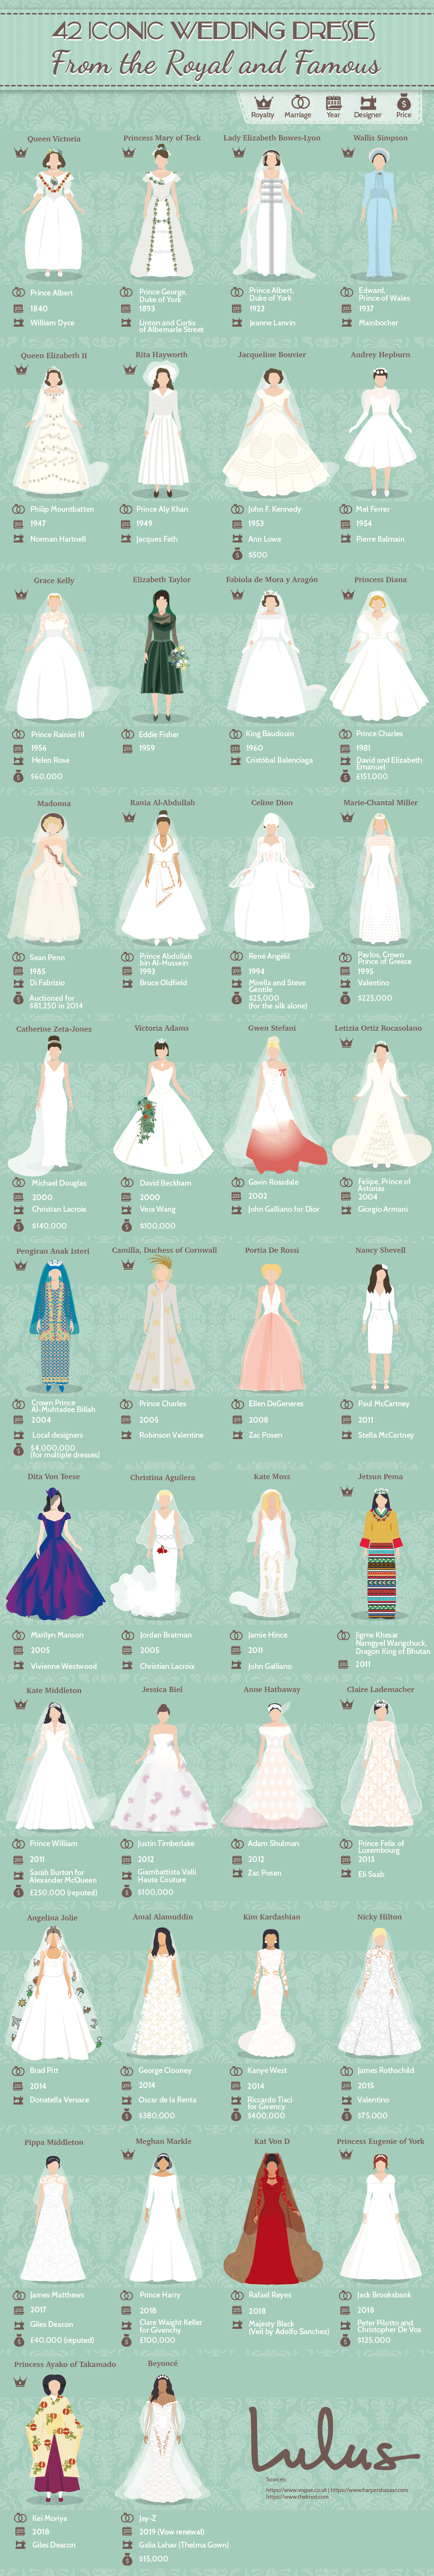 42 Iconic Wedding Dresses From the Royal and Famous